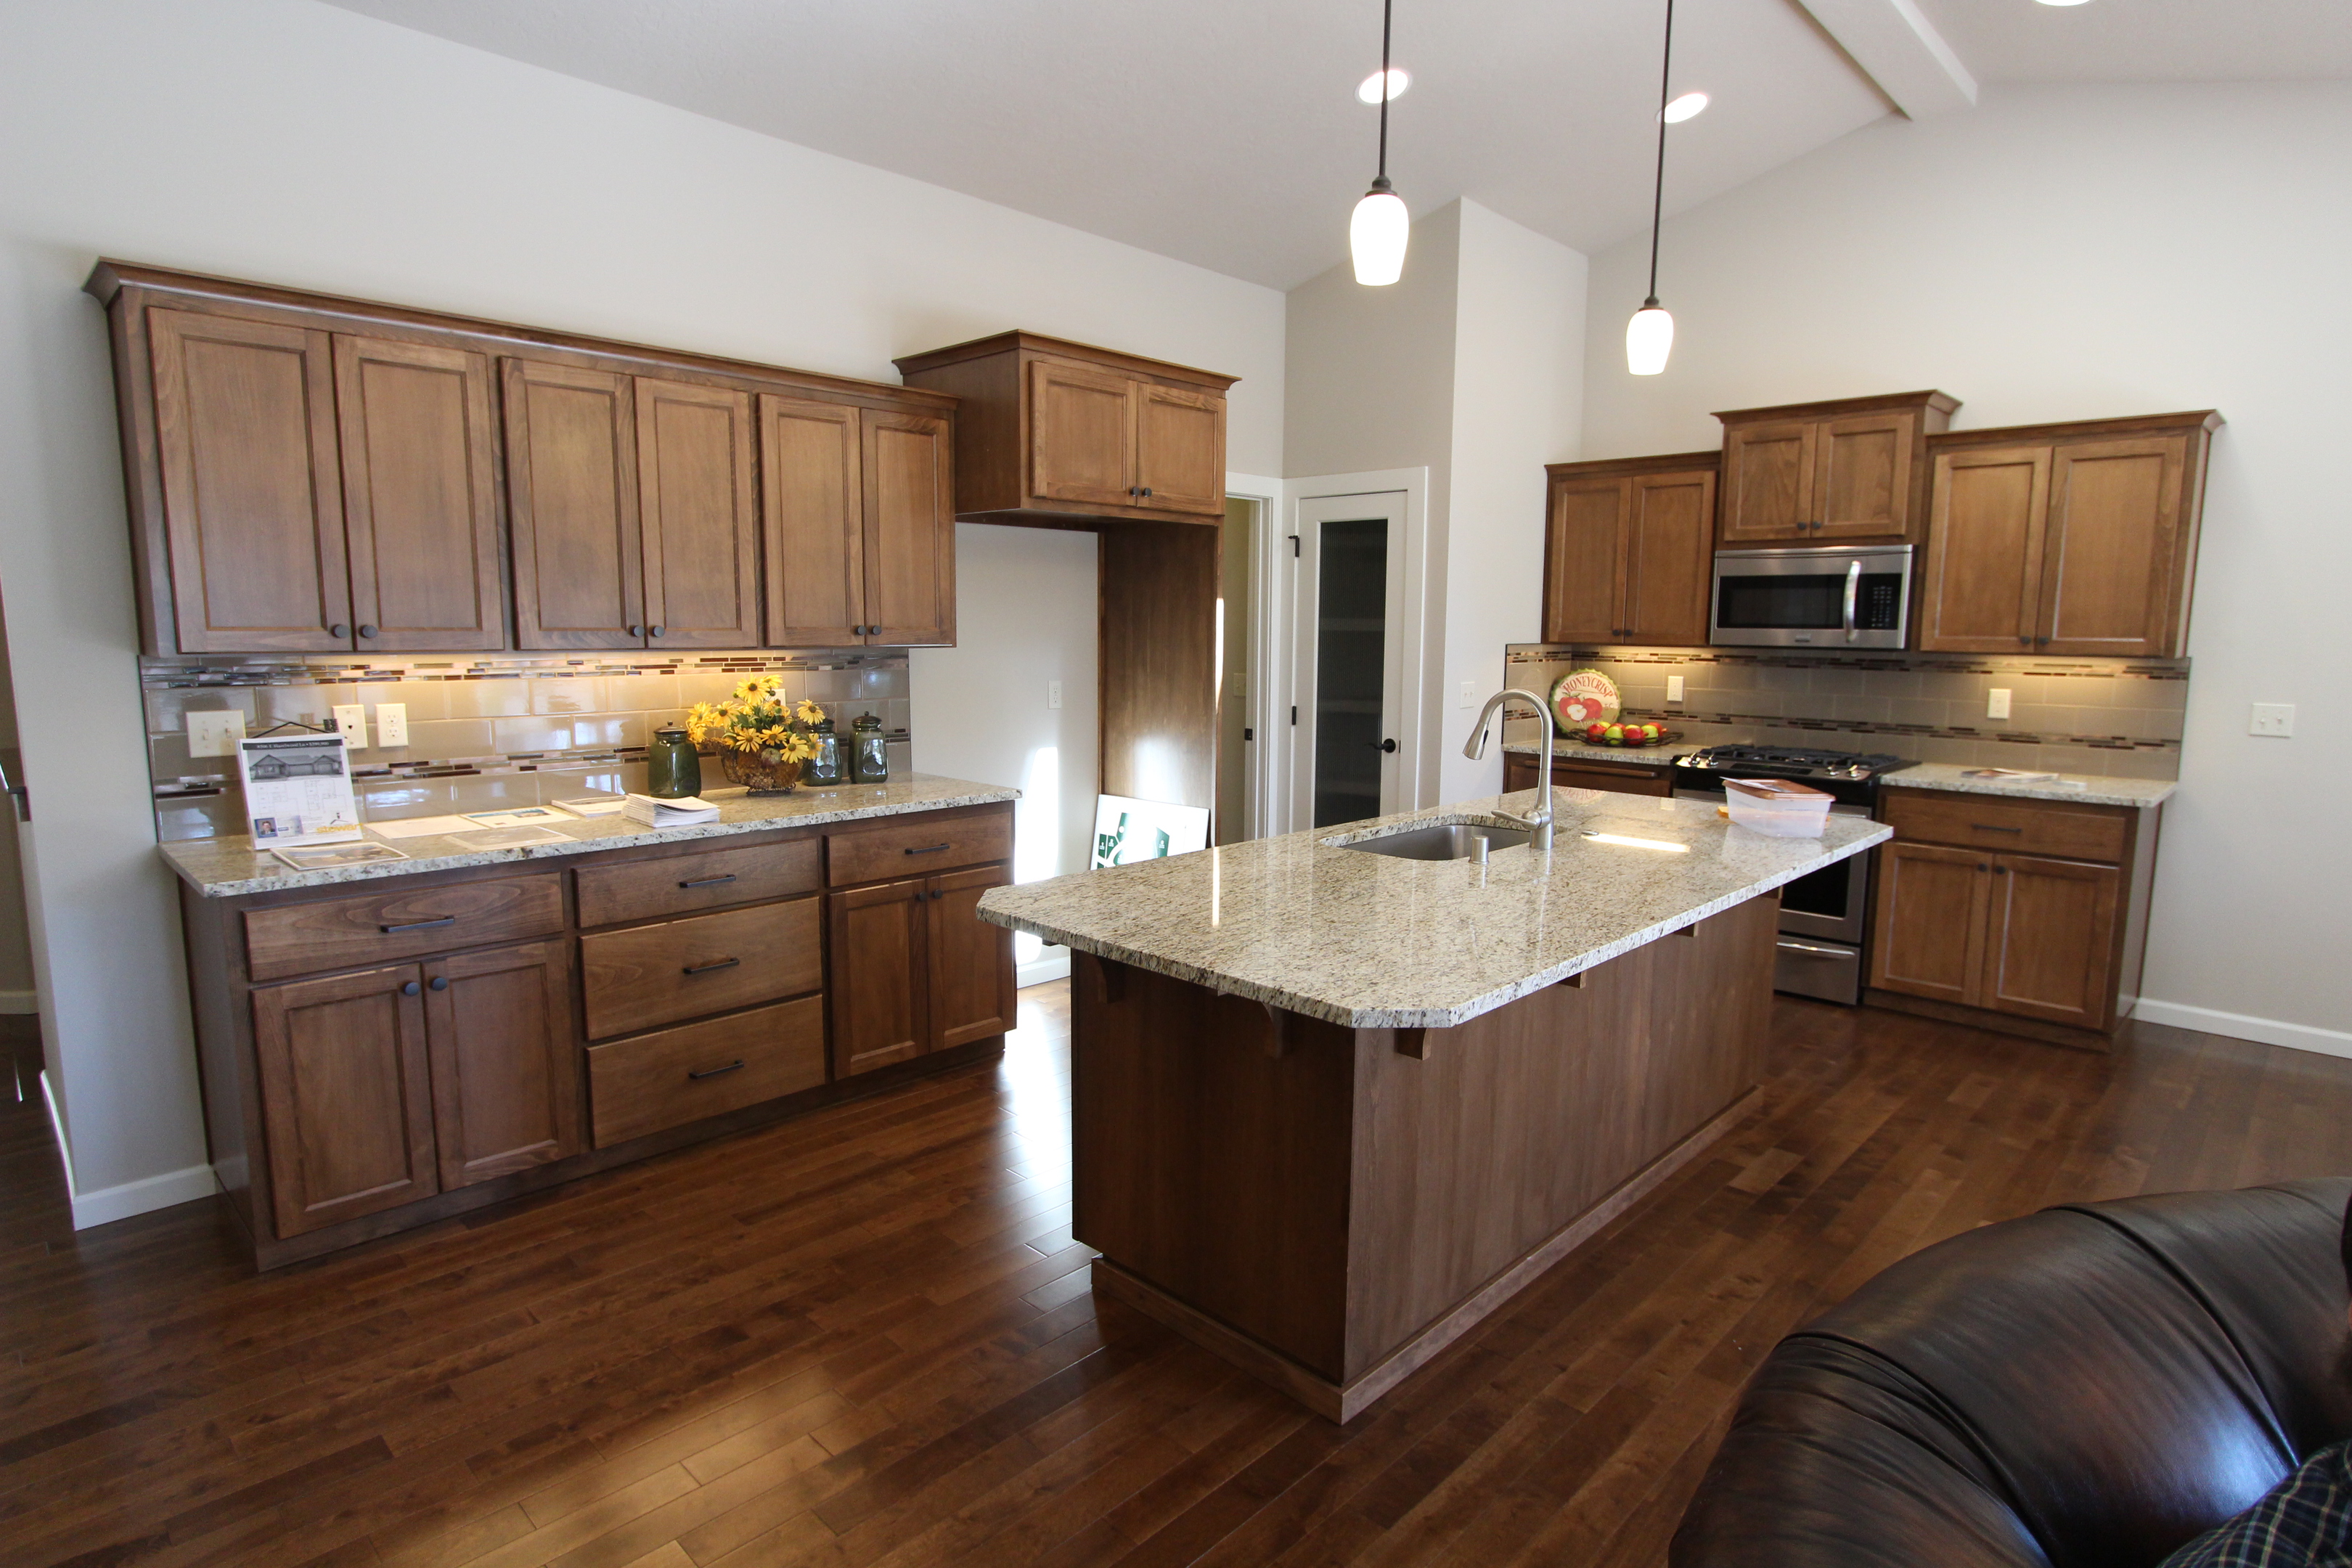 Beech Kitchen Cabinets Home Decor Gallery